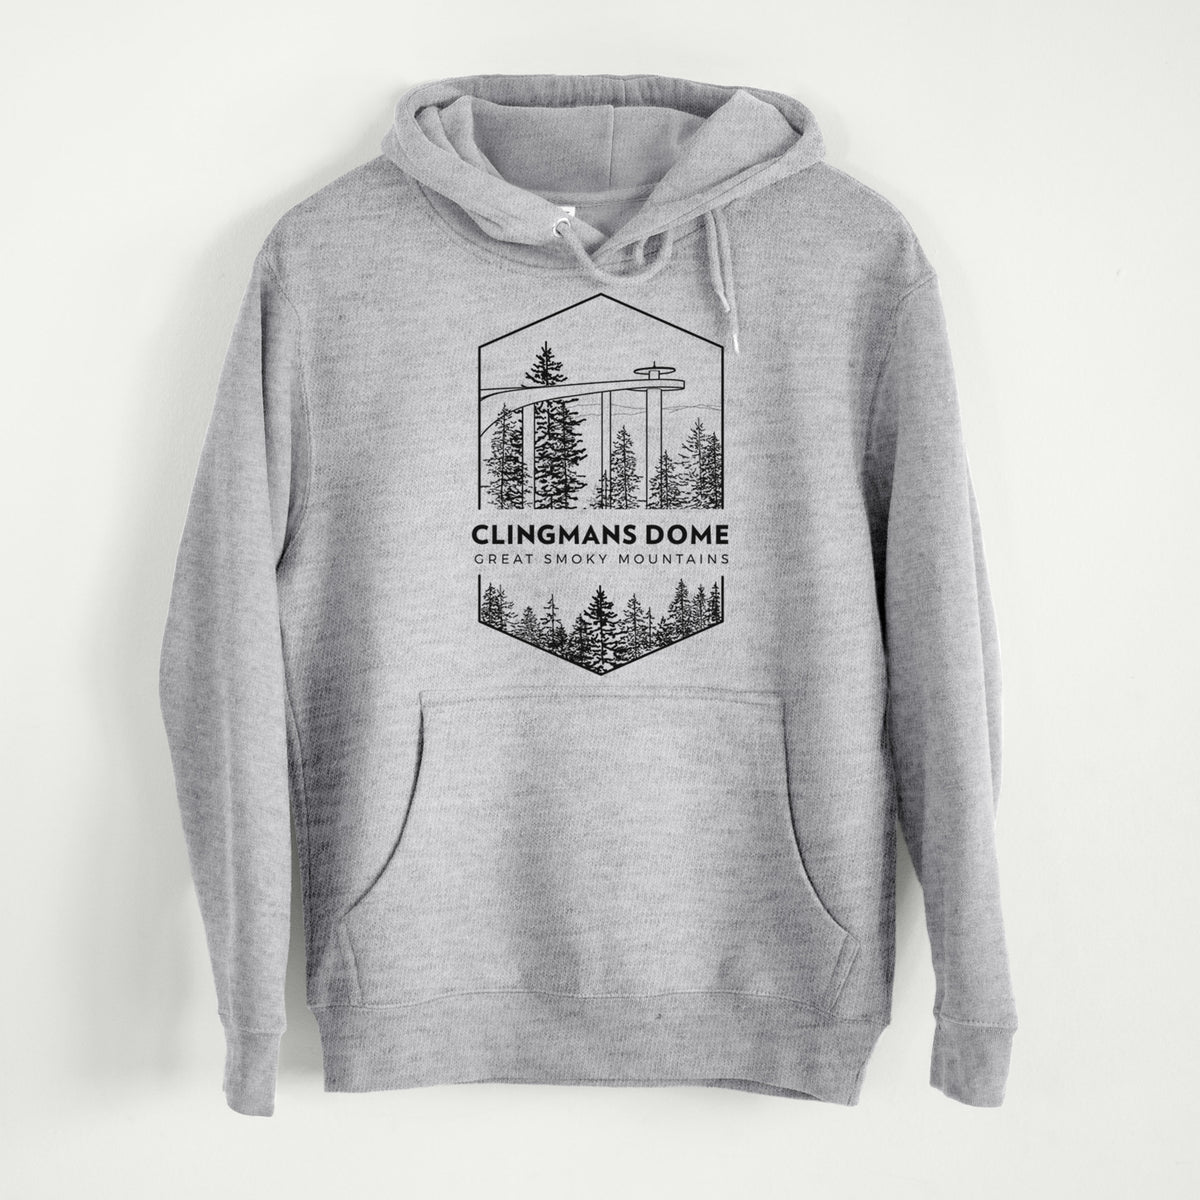 Clingmans Dome - Great Smoky Mountains National Park  - Mid-Weight Unisex Premium Blend Hoodie